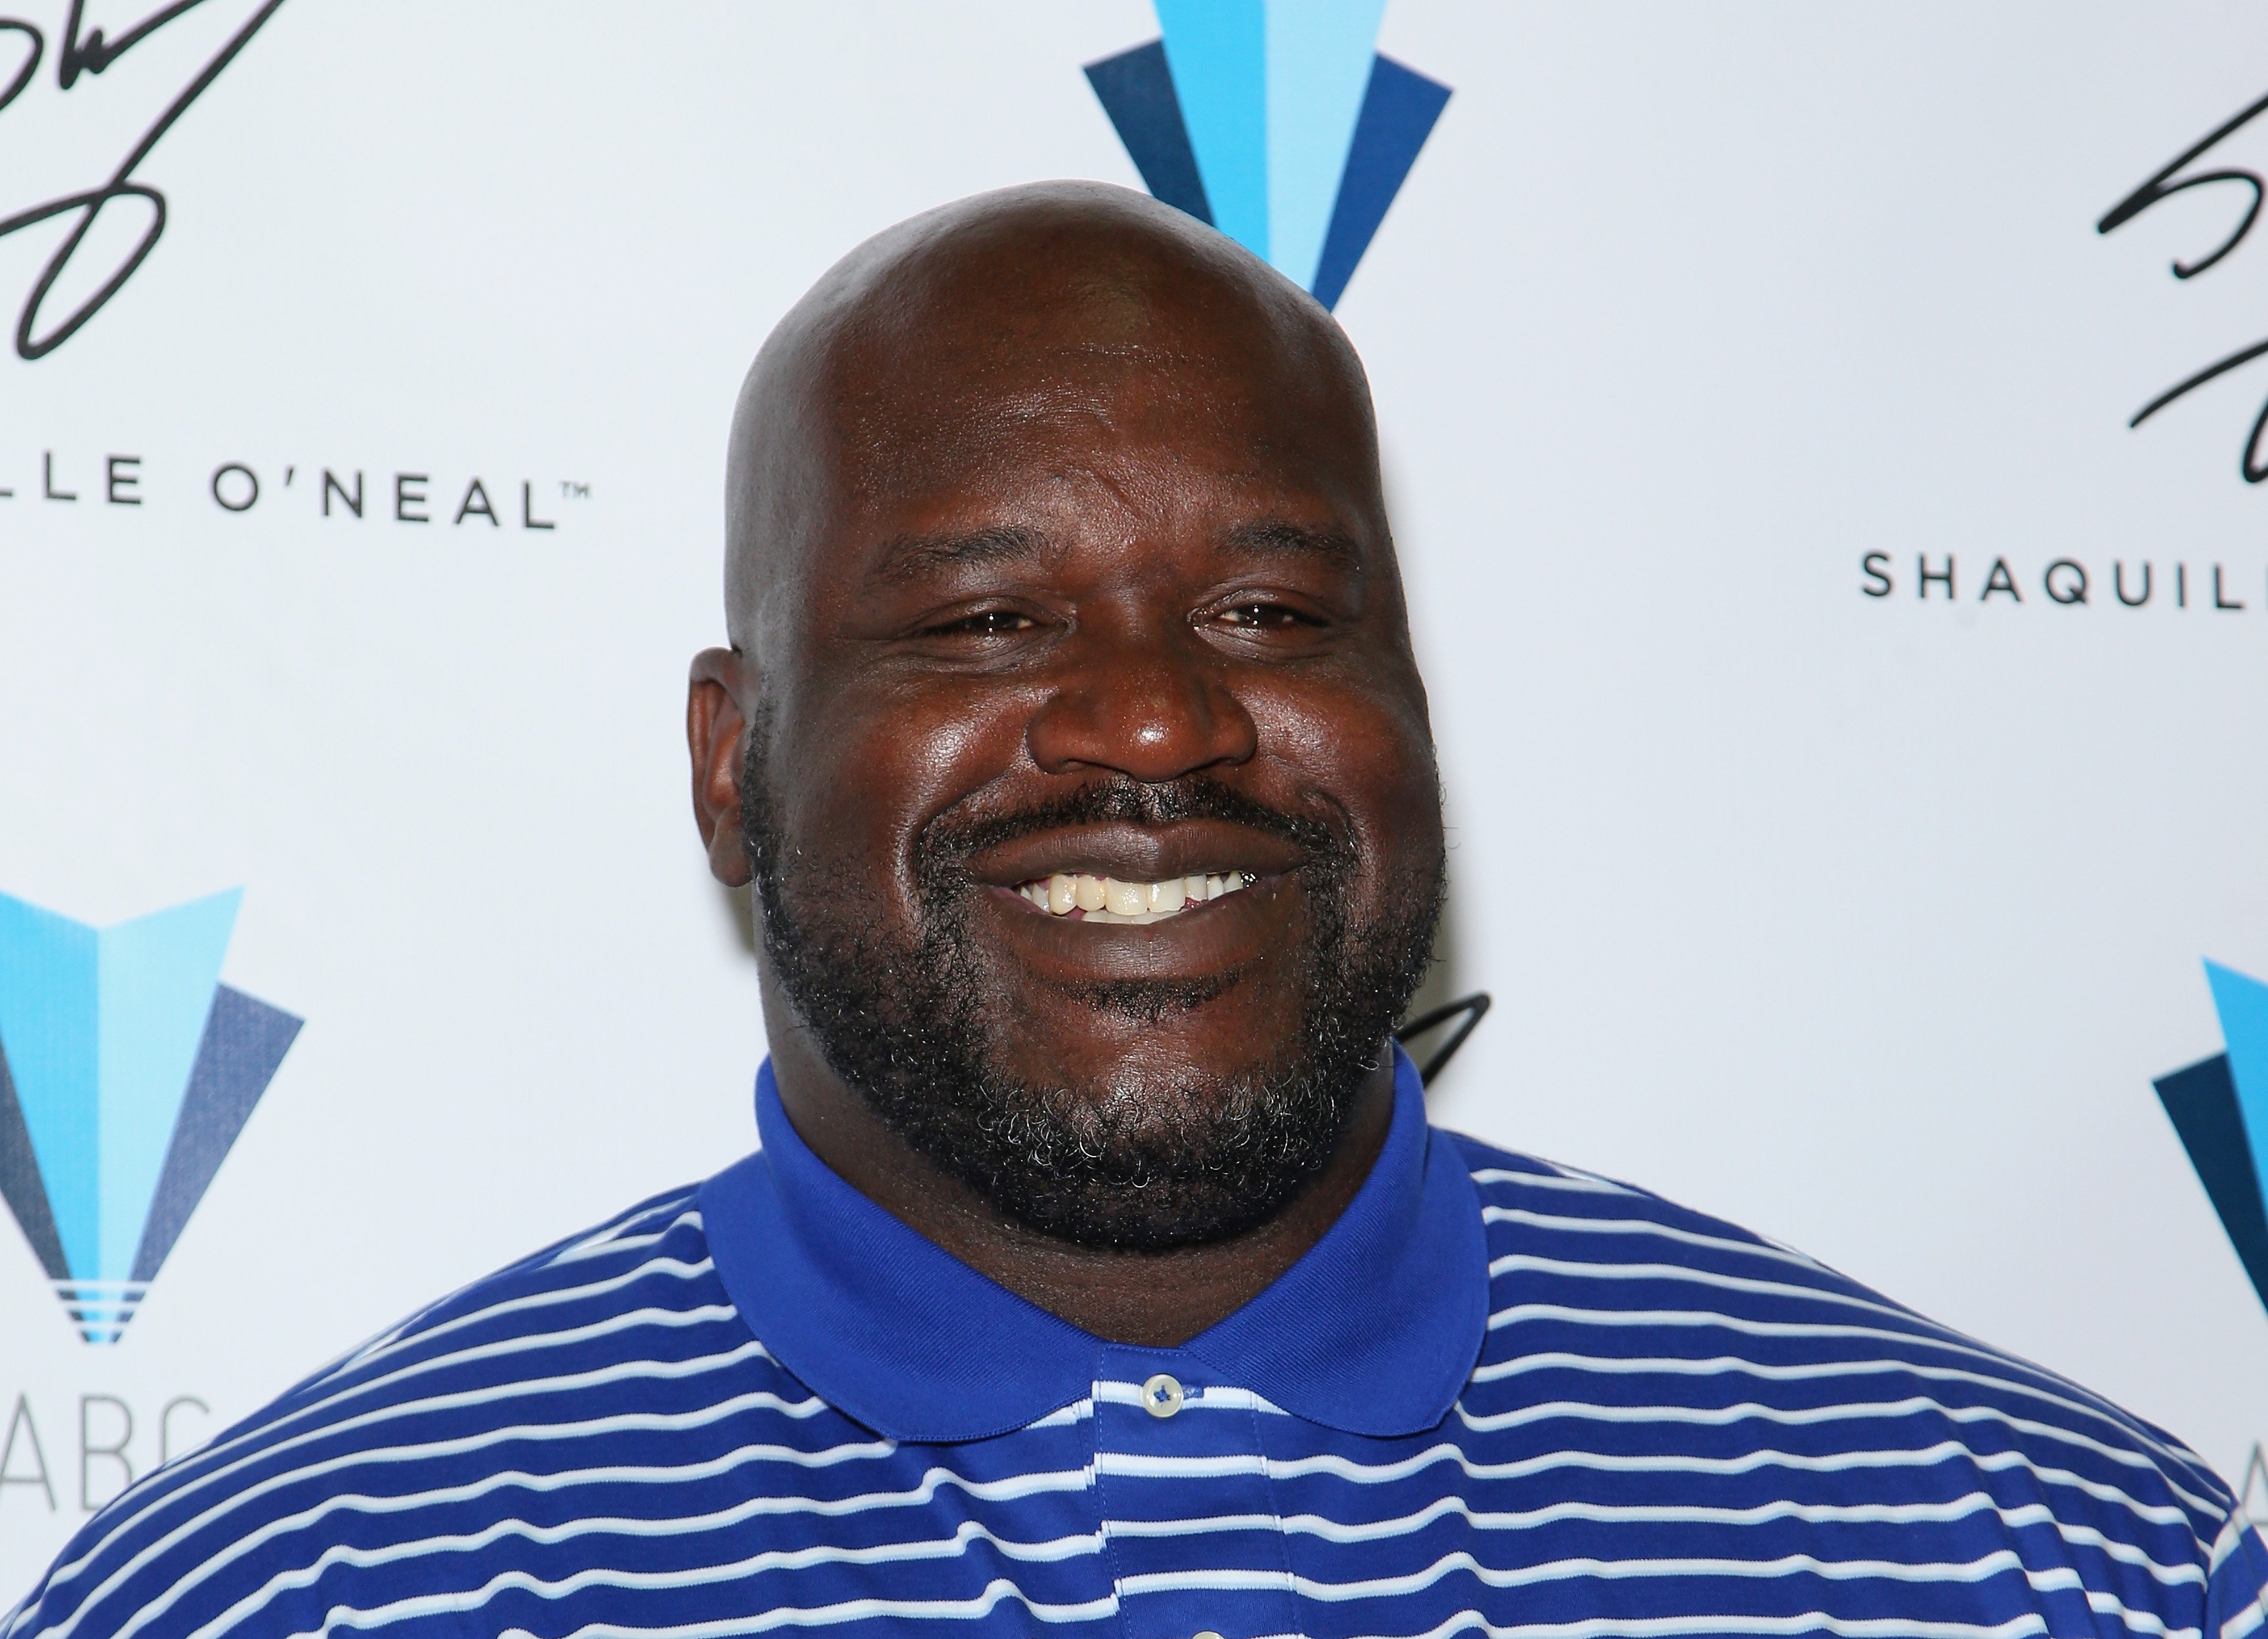 Shaquille O'Neal poses in the Authentic Brands Group booth during the Licensing Expo 2016 at the Mandalay Bay Convention Center on June 21, 2016 | Photo: Getty Images